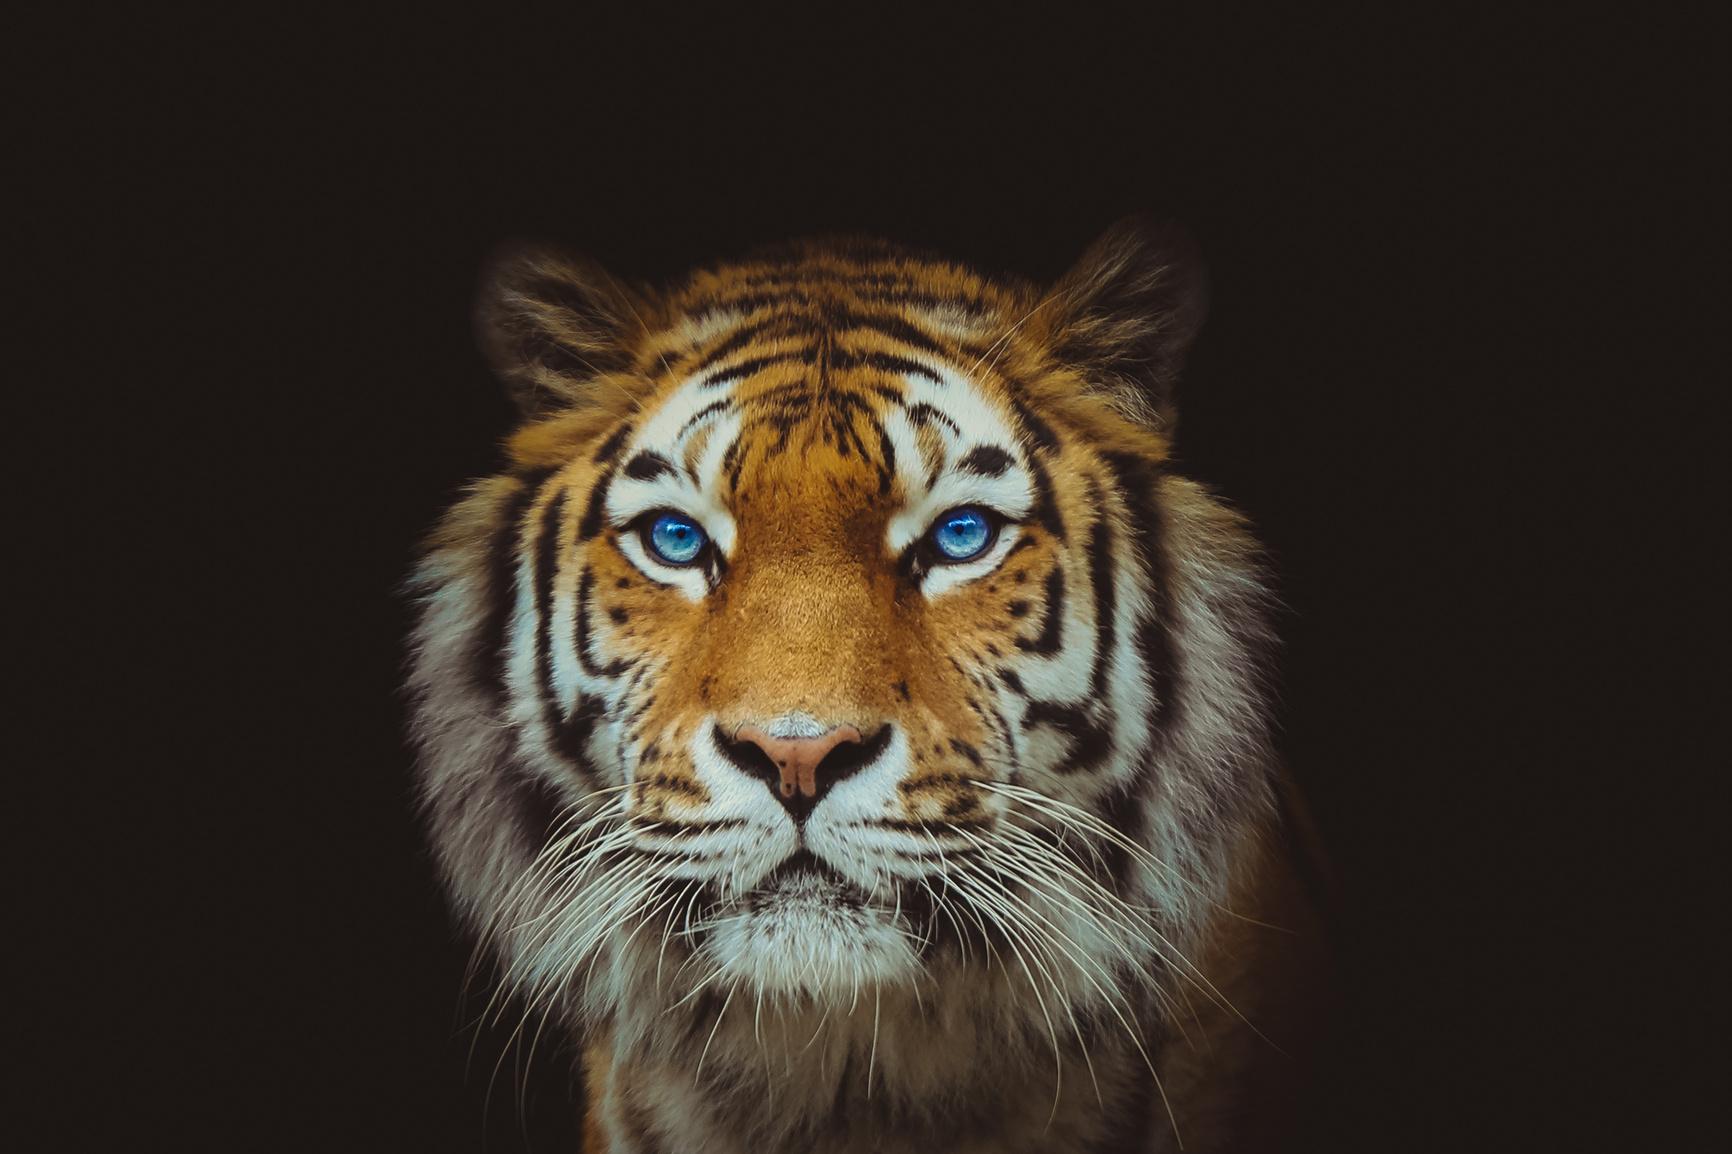 Eye of the Tiger